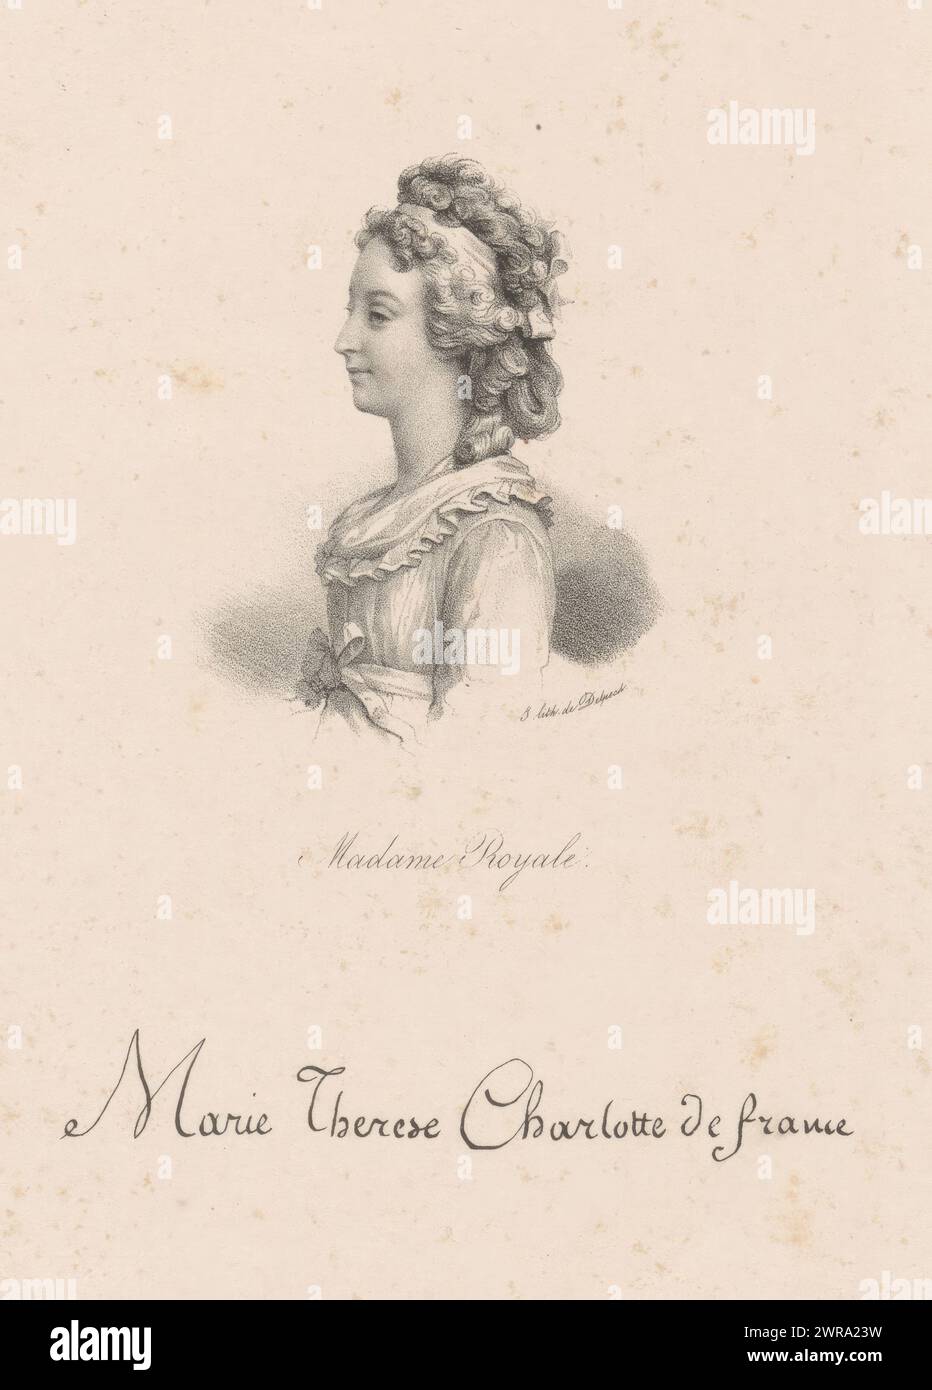 Portrait of Marie Thérèse Charlotte of France, Madame Royale (title on object), print maker: anonymous, printer: veuve Delpech (Naudet), Paris, in or after 1818 - in or before 1842, paper, height 272 mm × width 181 mm, print Stock Photo